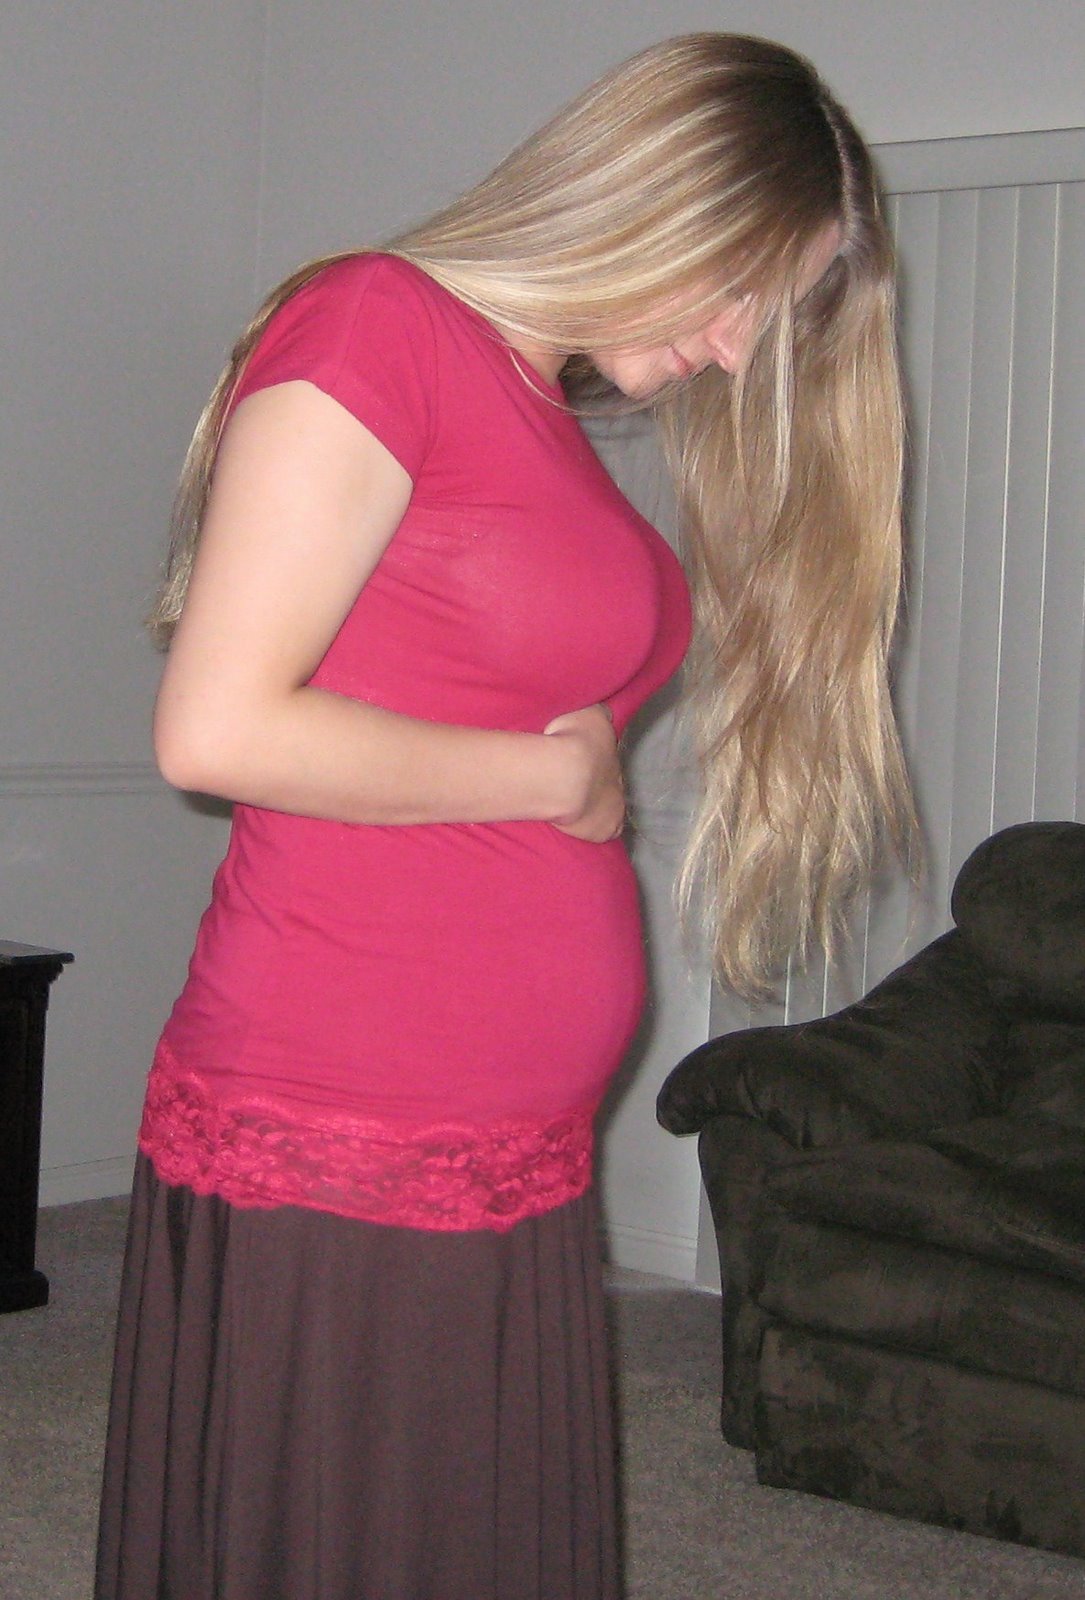 [Baby+Bump+Pictures+1.jpg]